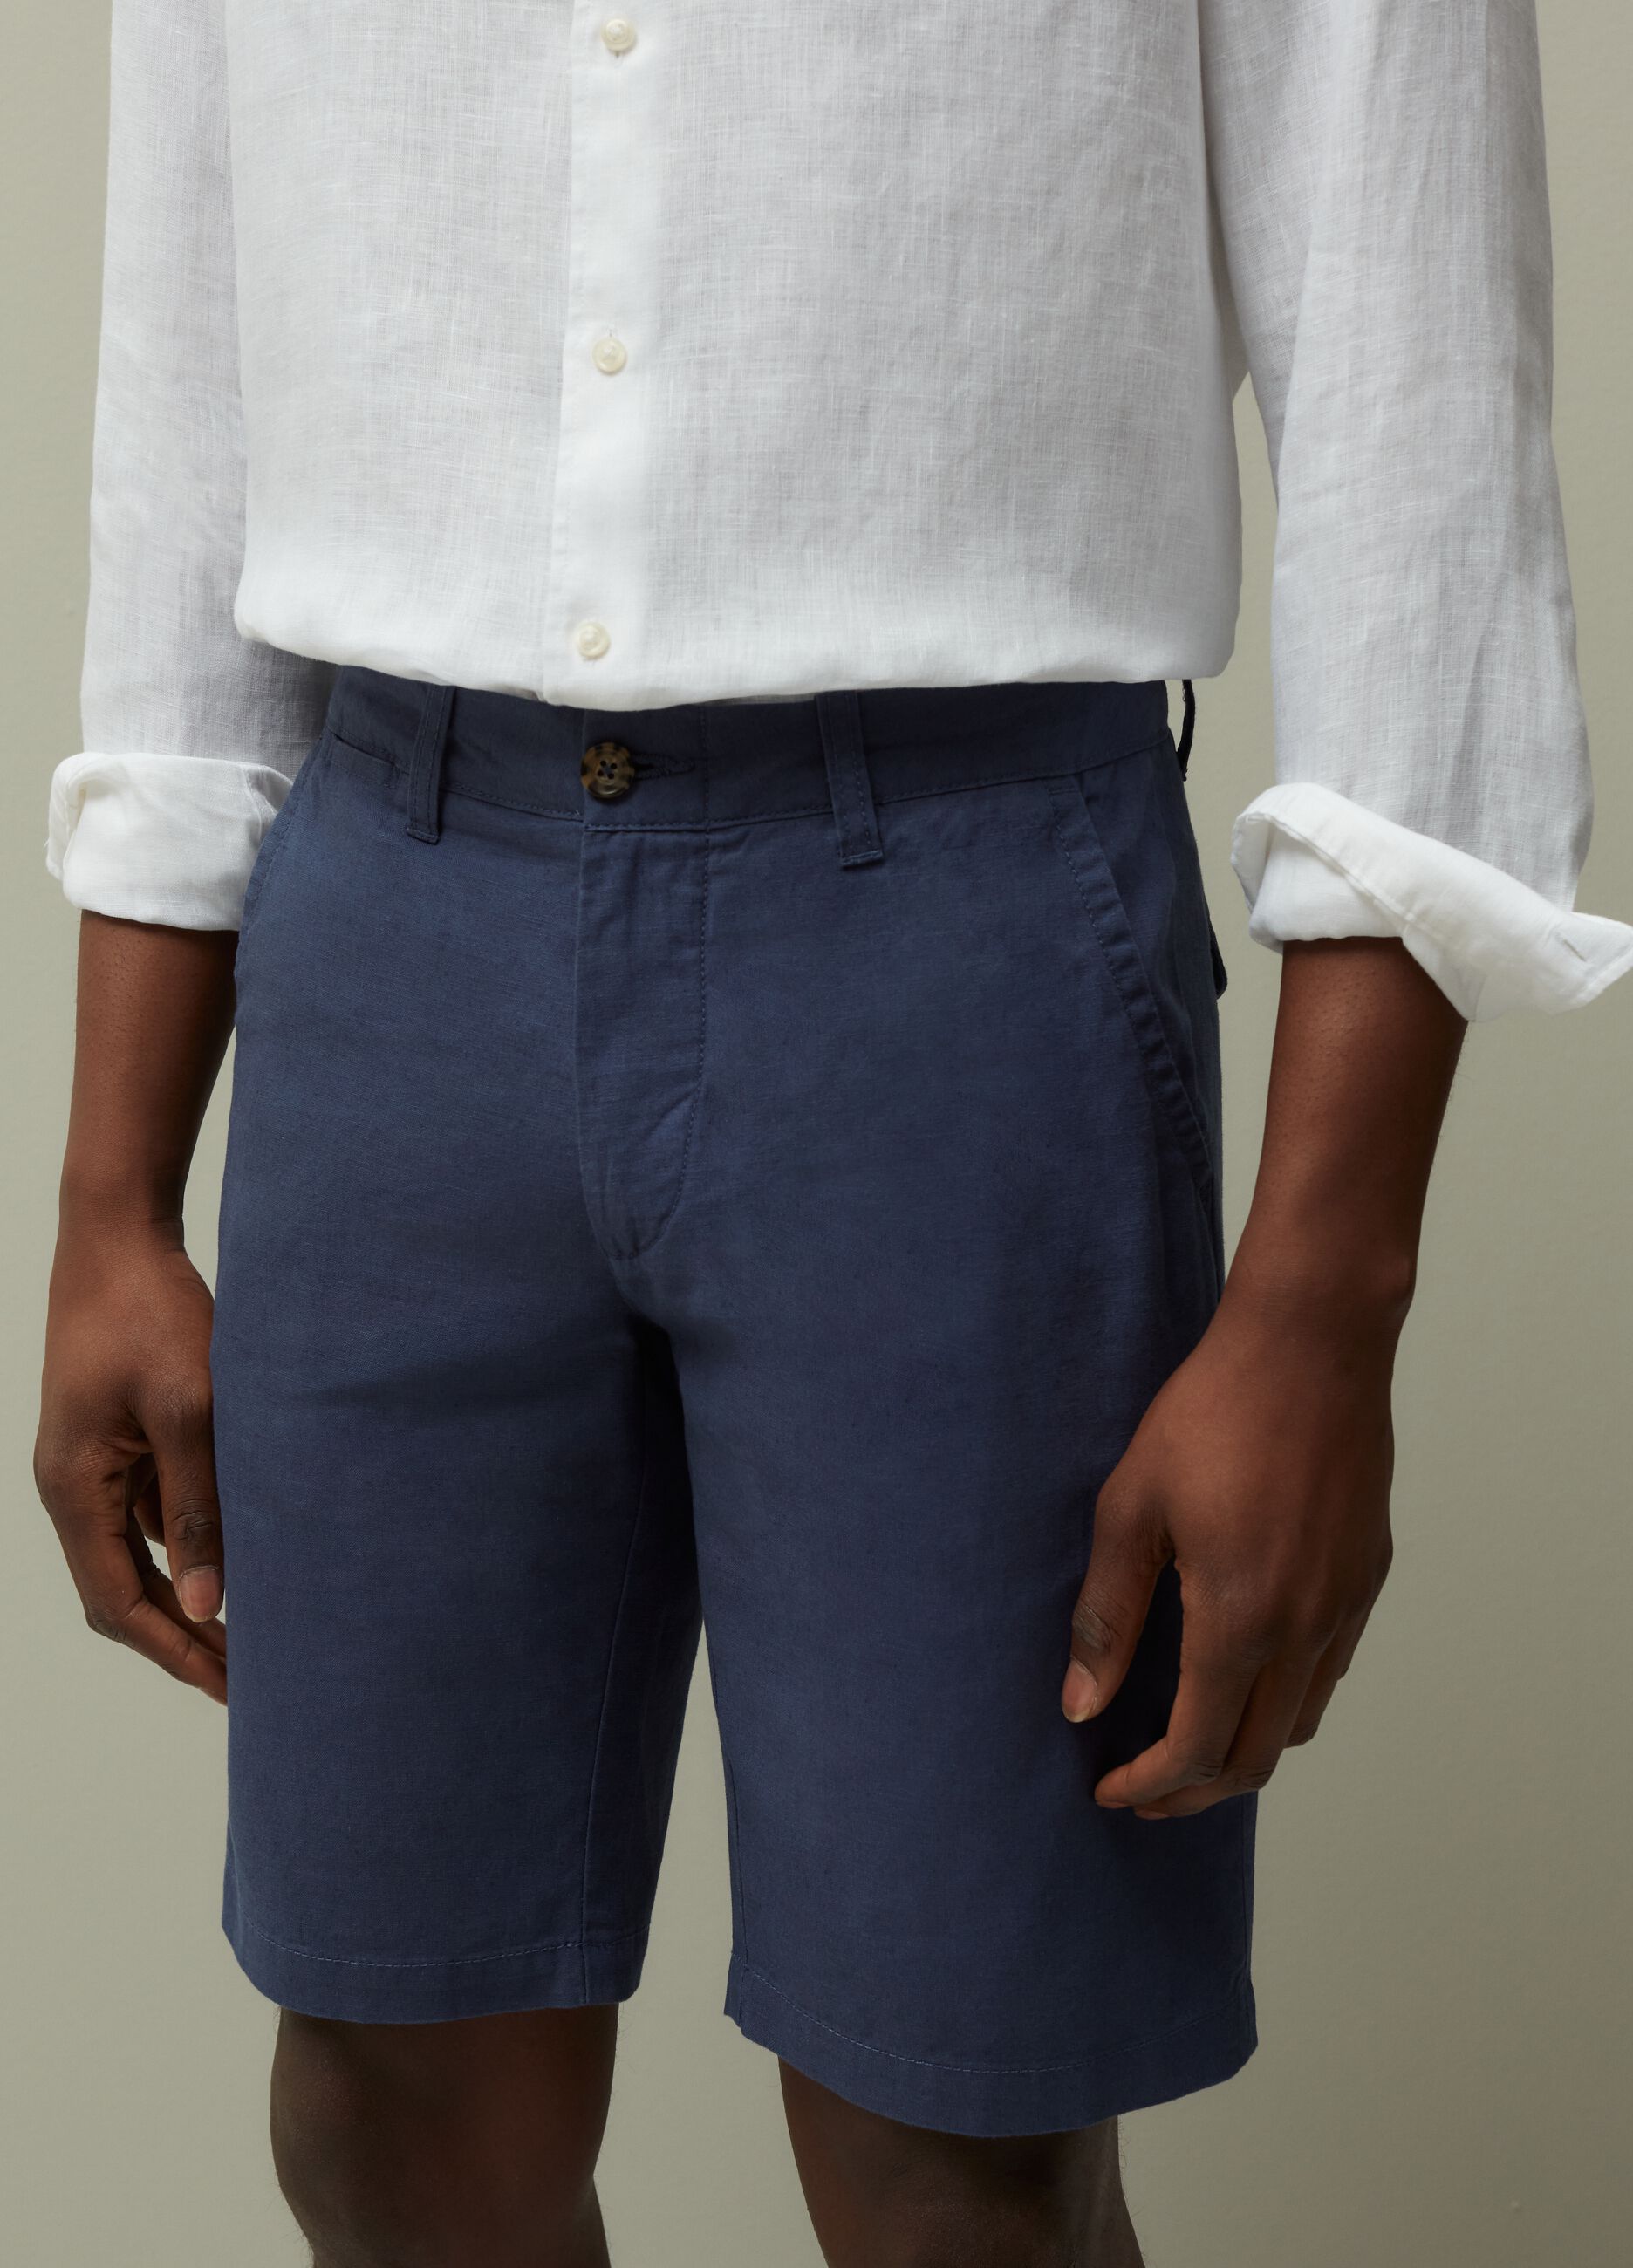 Bermuda chinos in linen and cotton